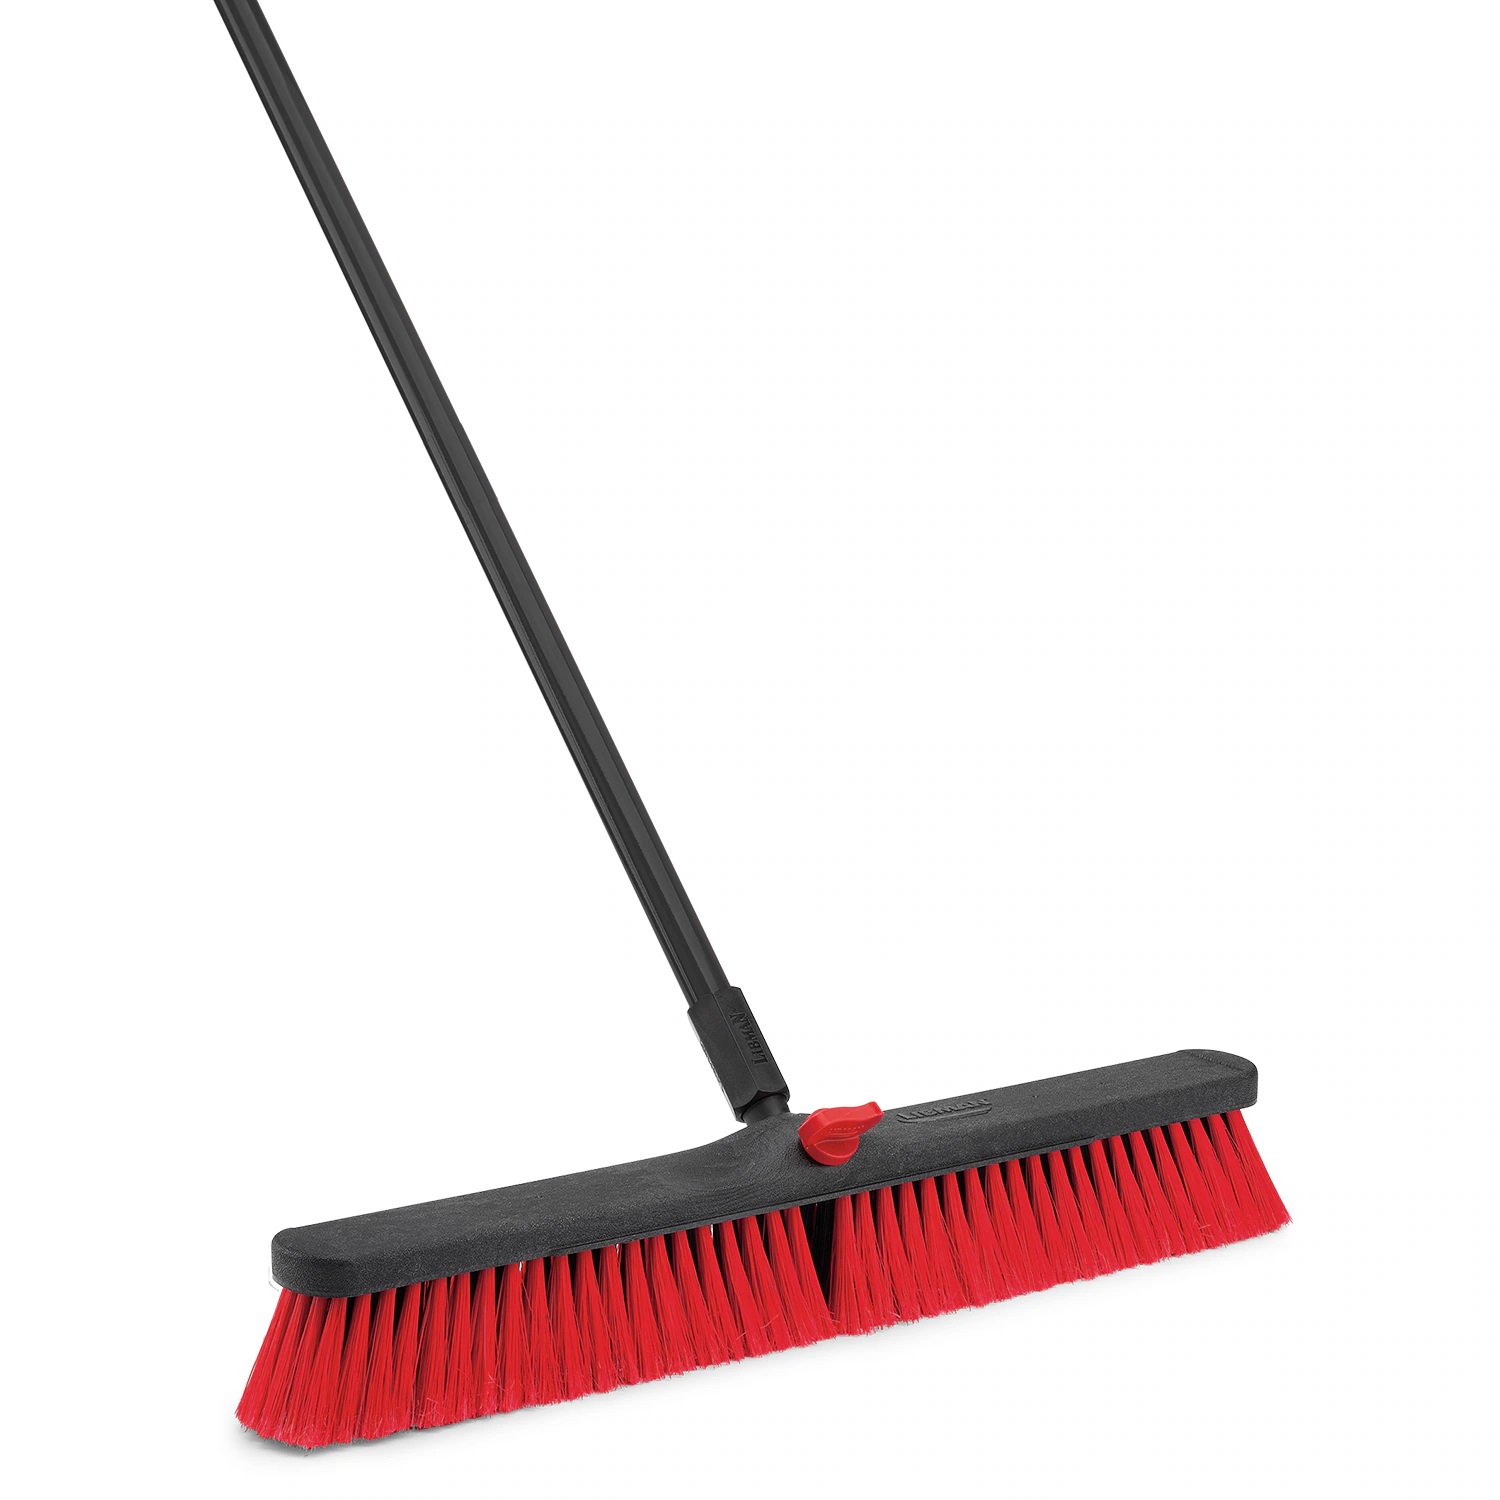 What Is A Push Broom